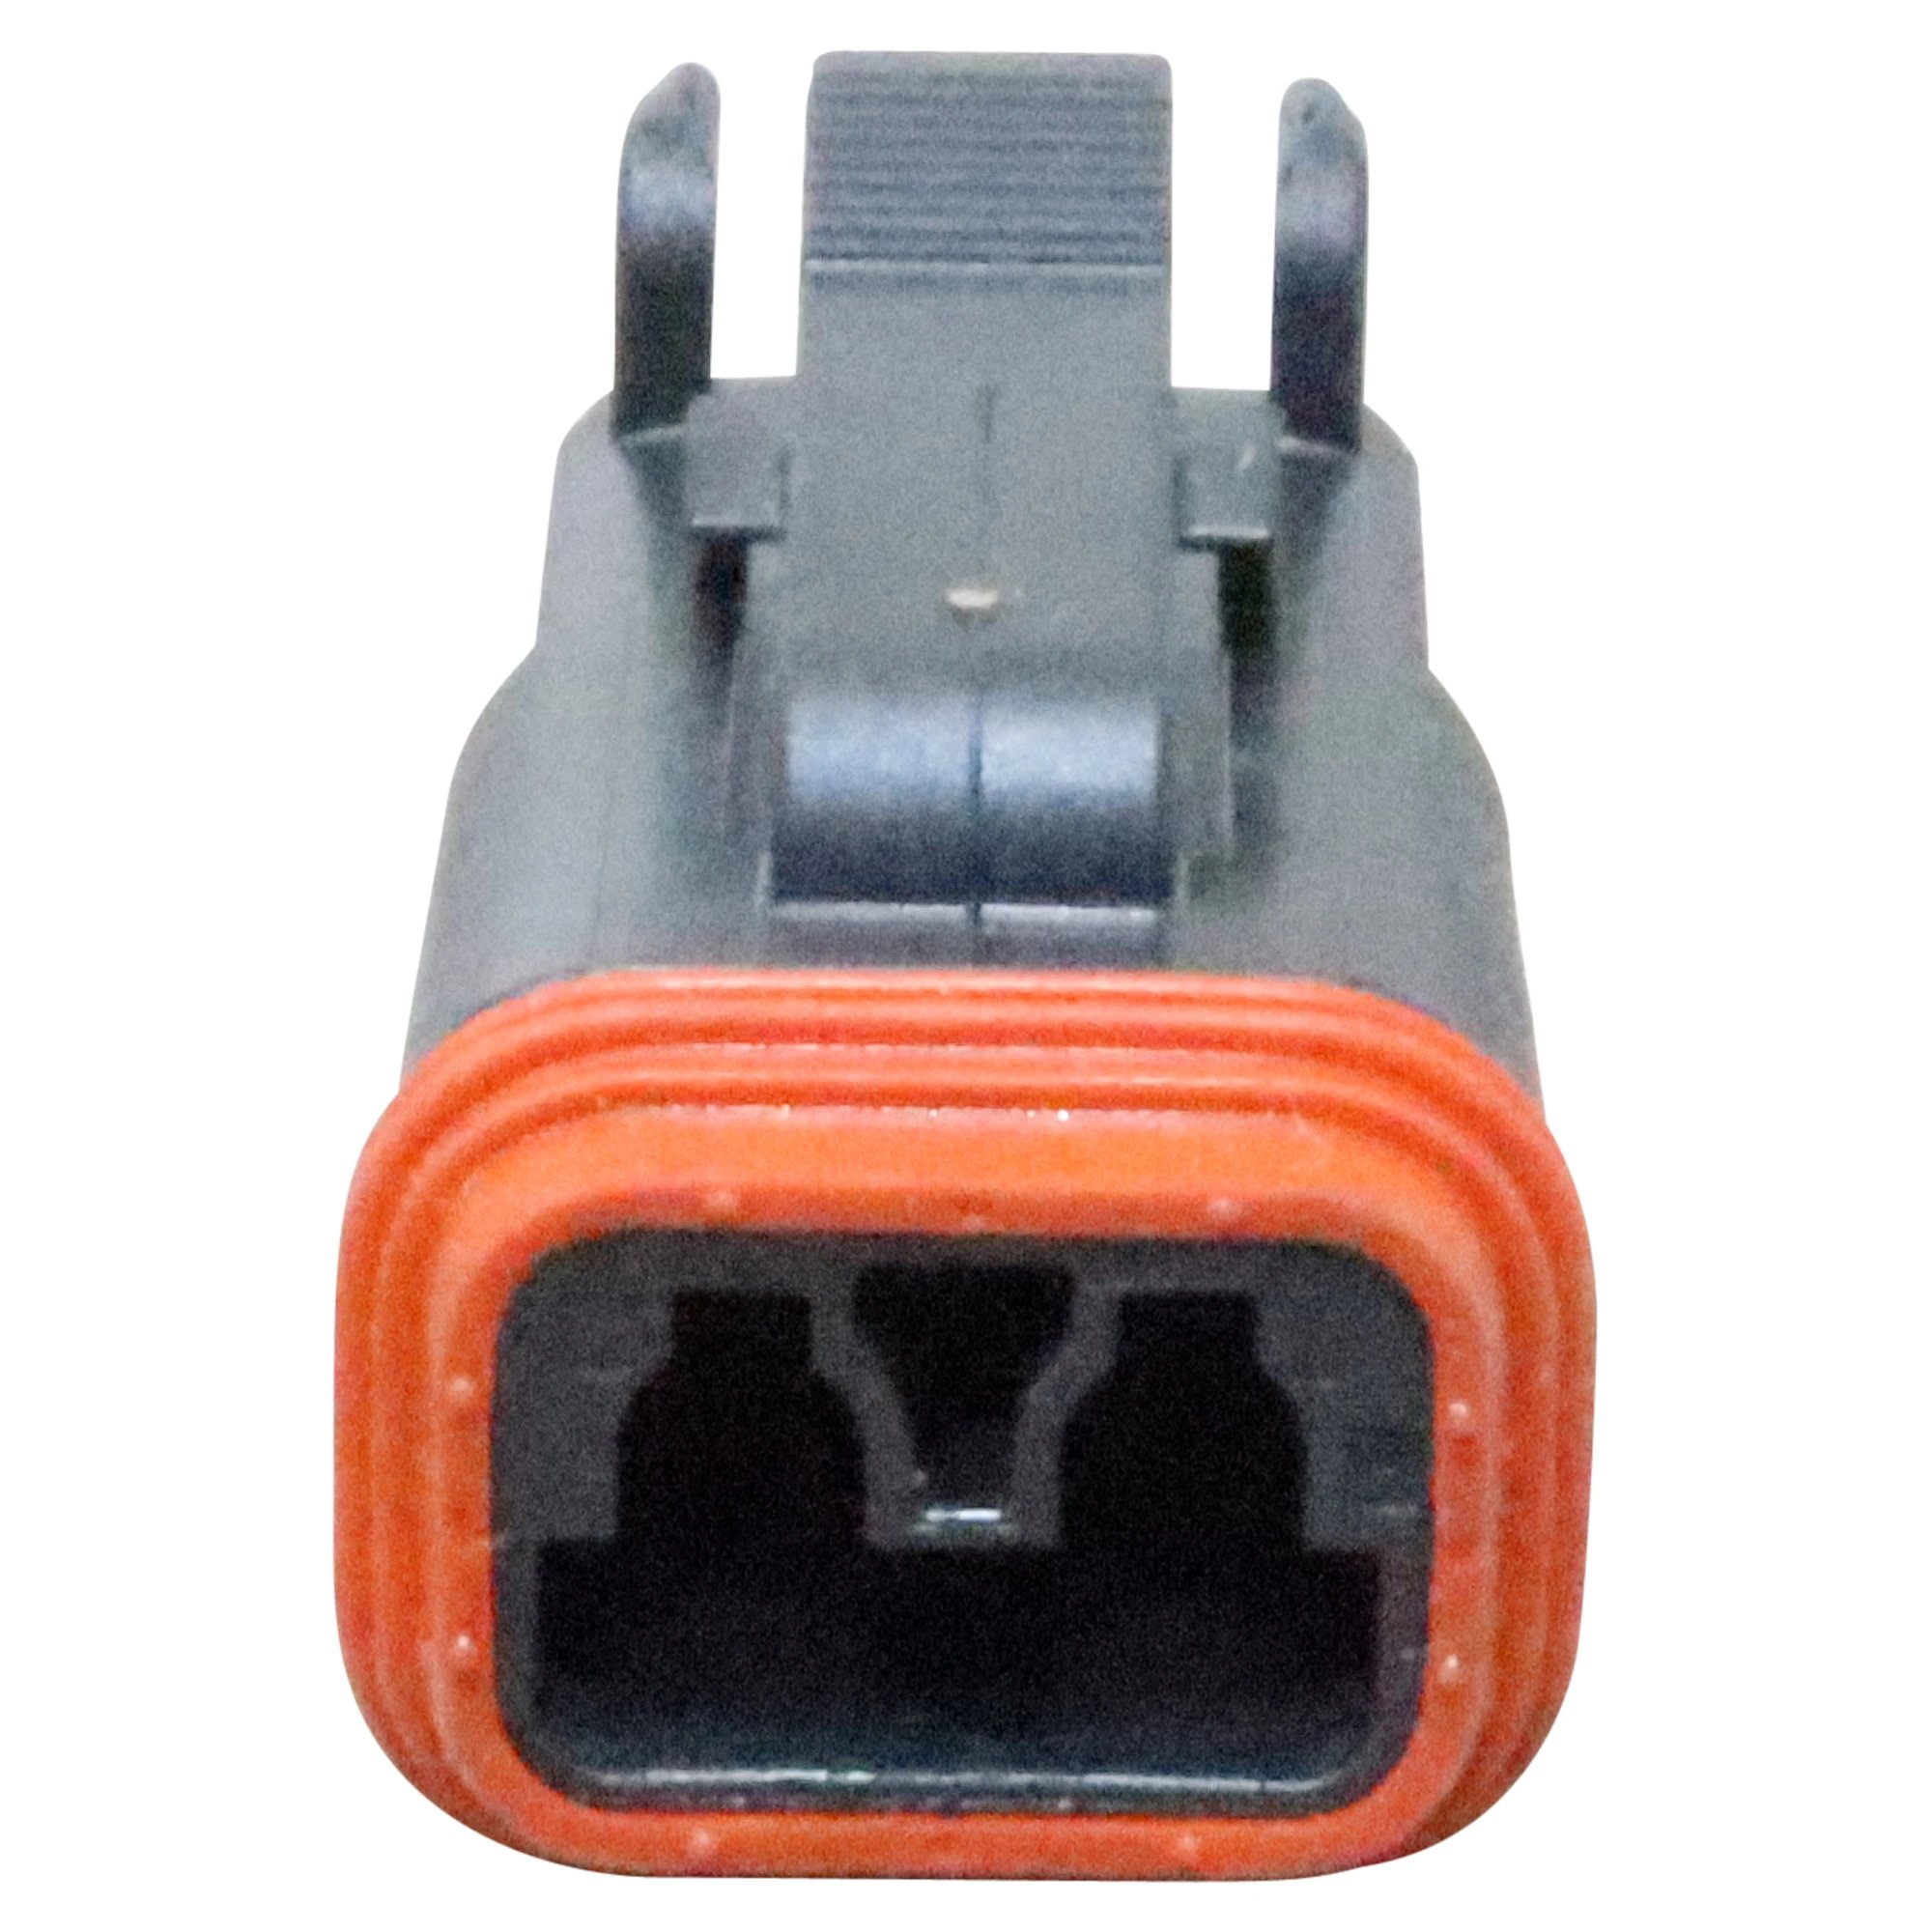 Wastebuilt® Replacement for McNeilus Connector,2 Socket Plug